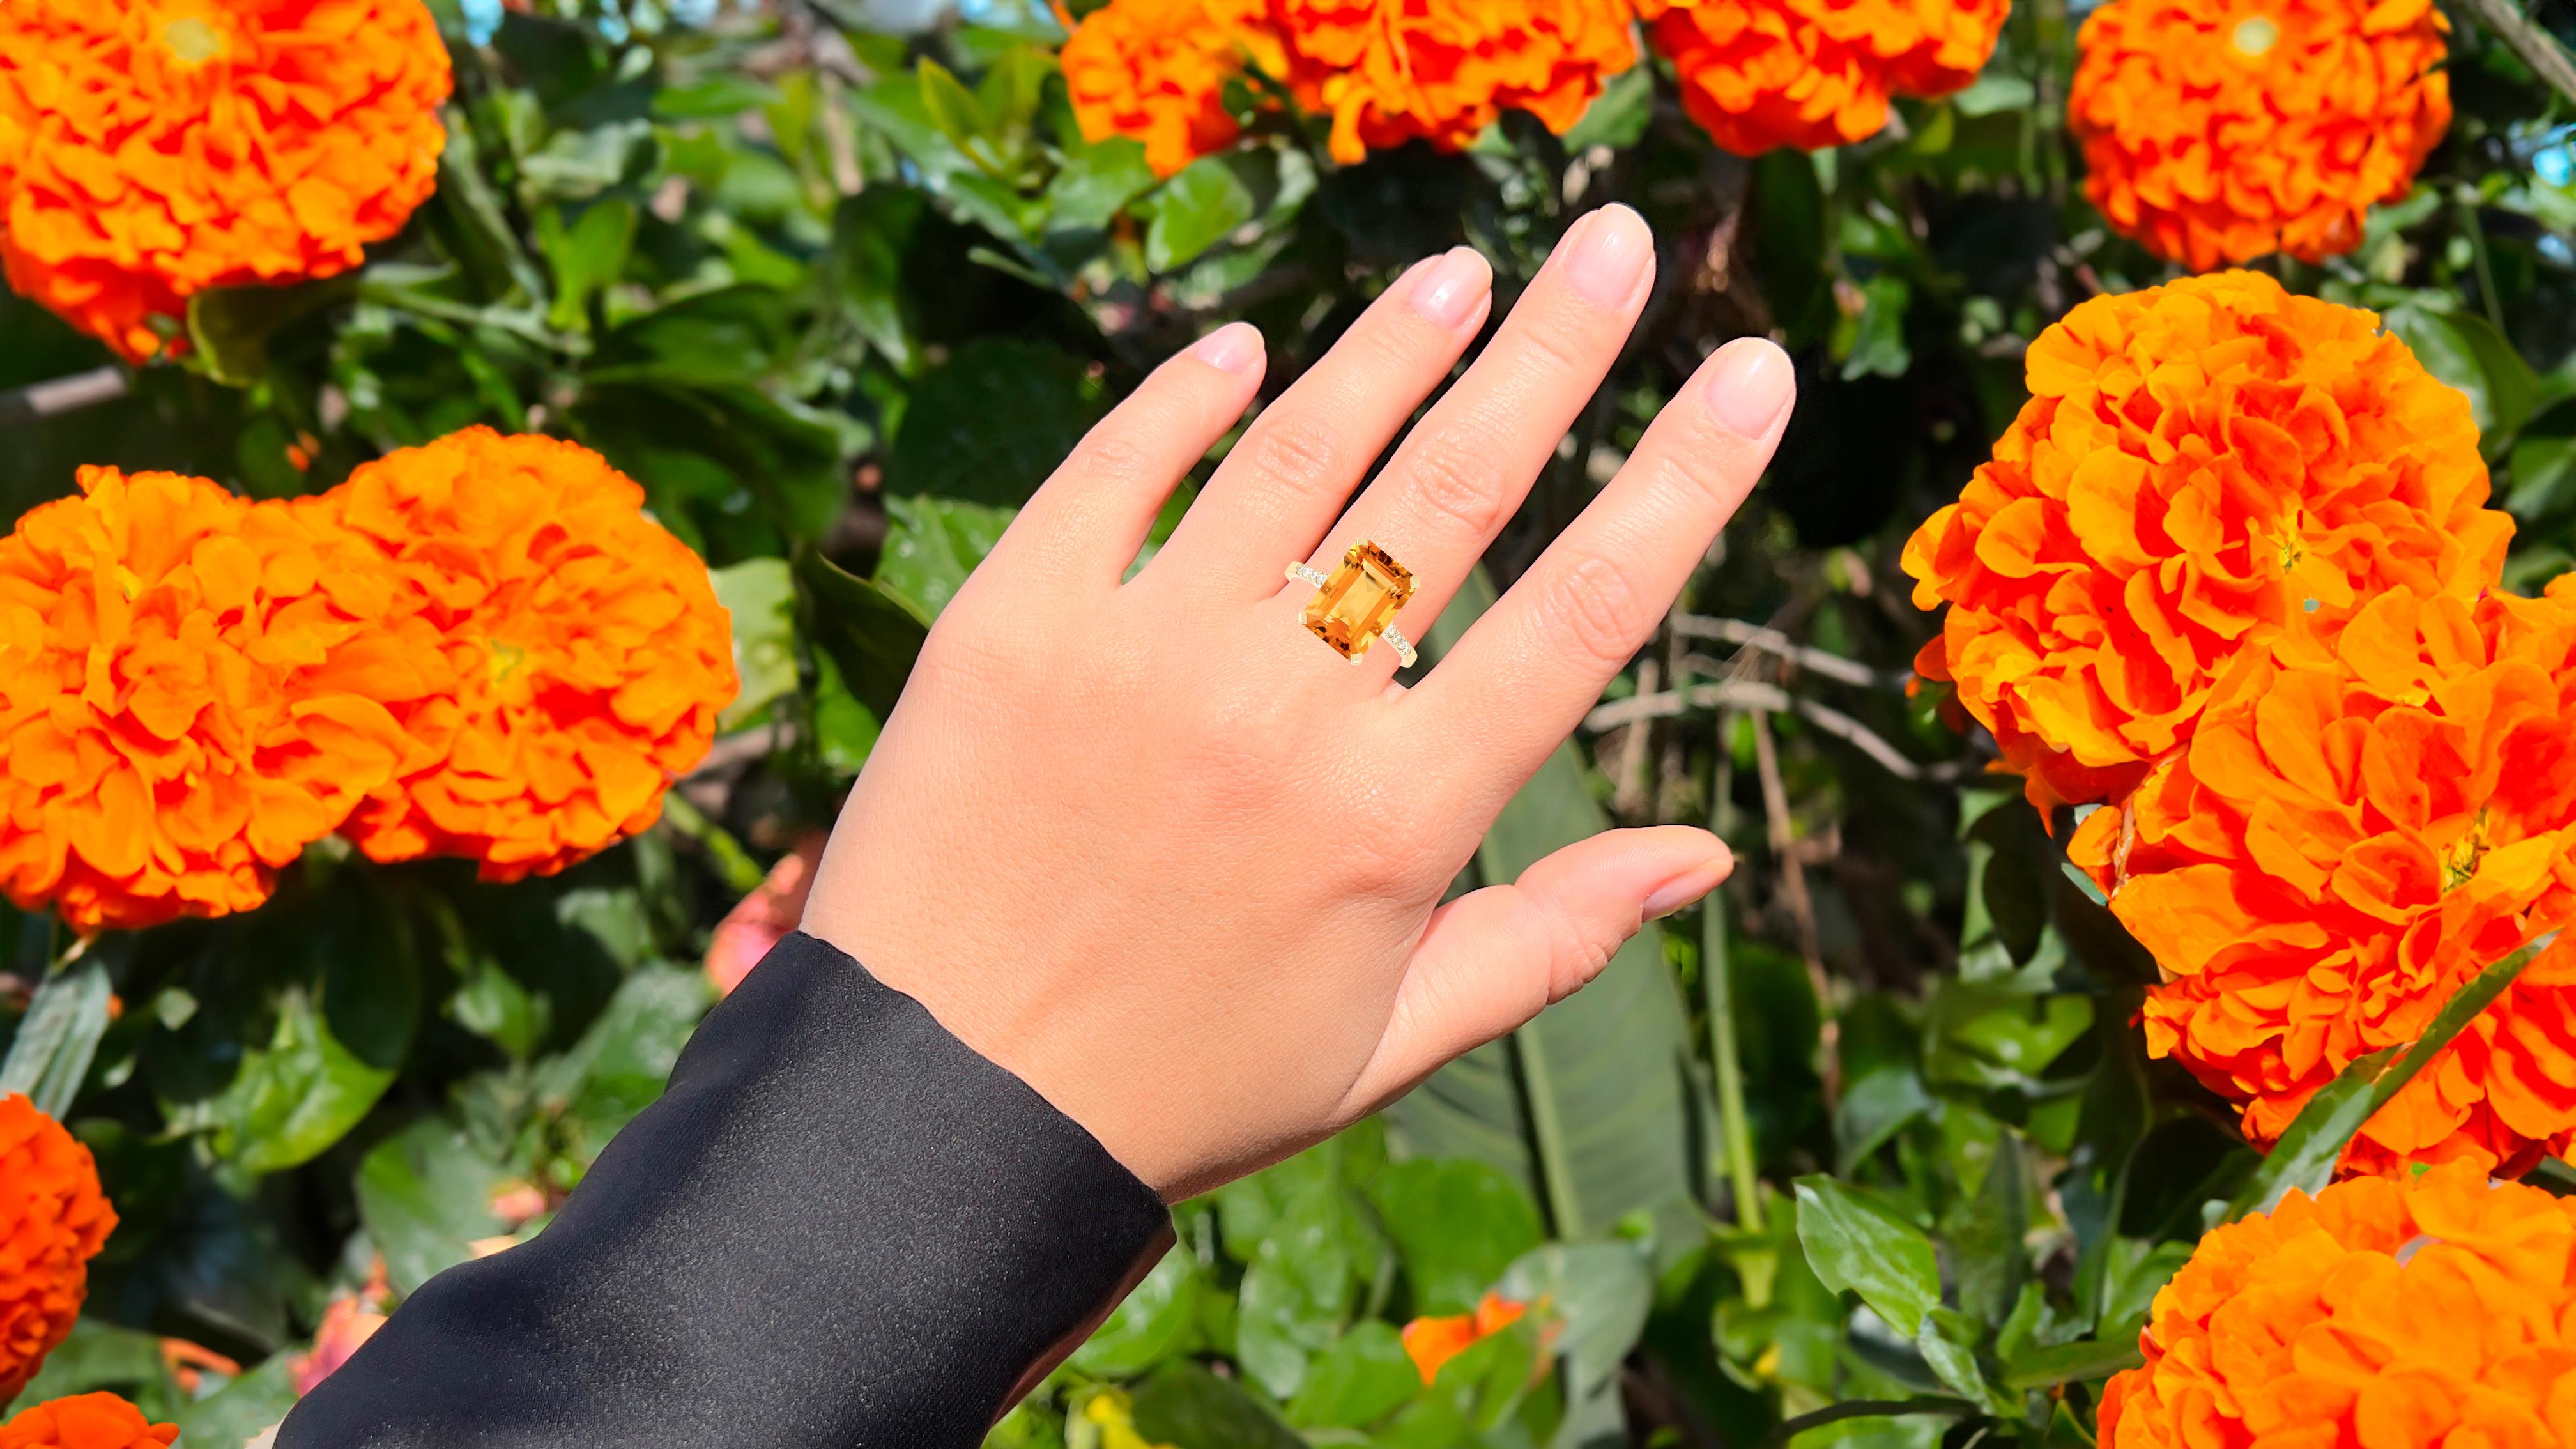 It comes with the Gemological Appraisal by GIA GG/AJP
All Gemstones are Natural
Citrine = 6.82 Carats
Diamonds = 0.18 Carats
Metal: 18K Yellow Gold
Ring Size: 7* US
*It can be resized complimentary